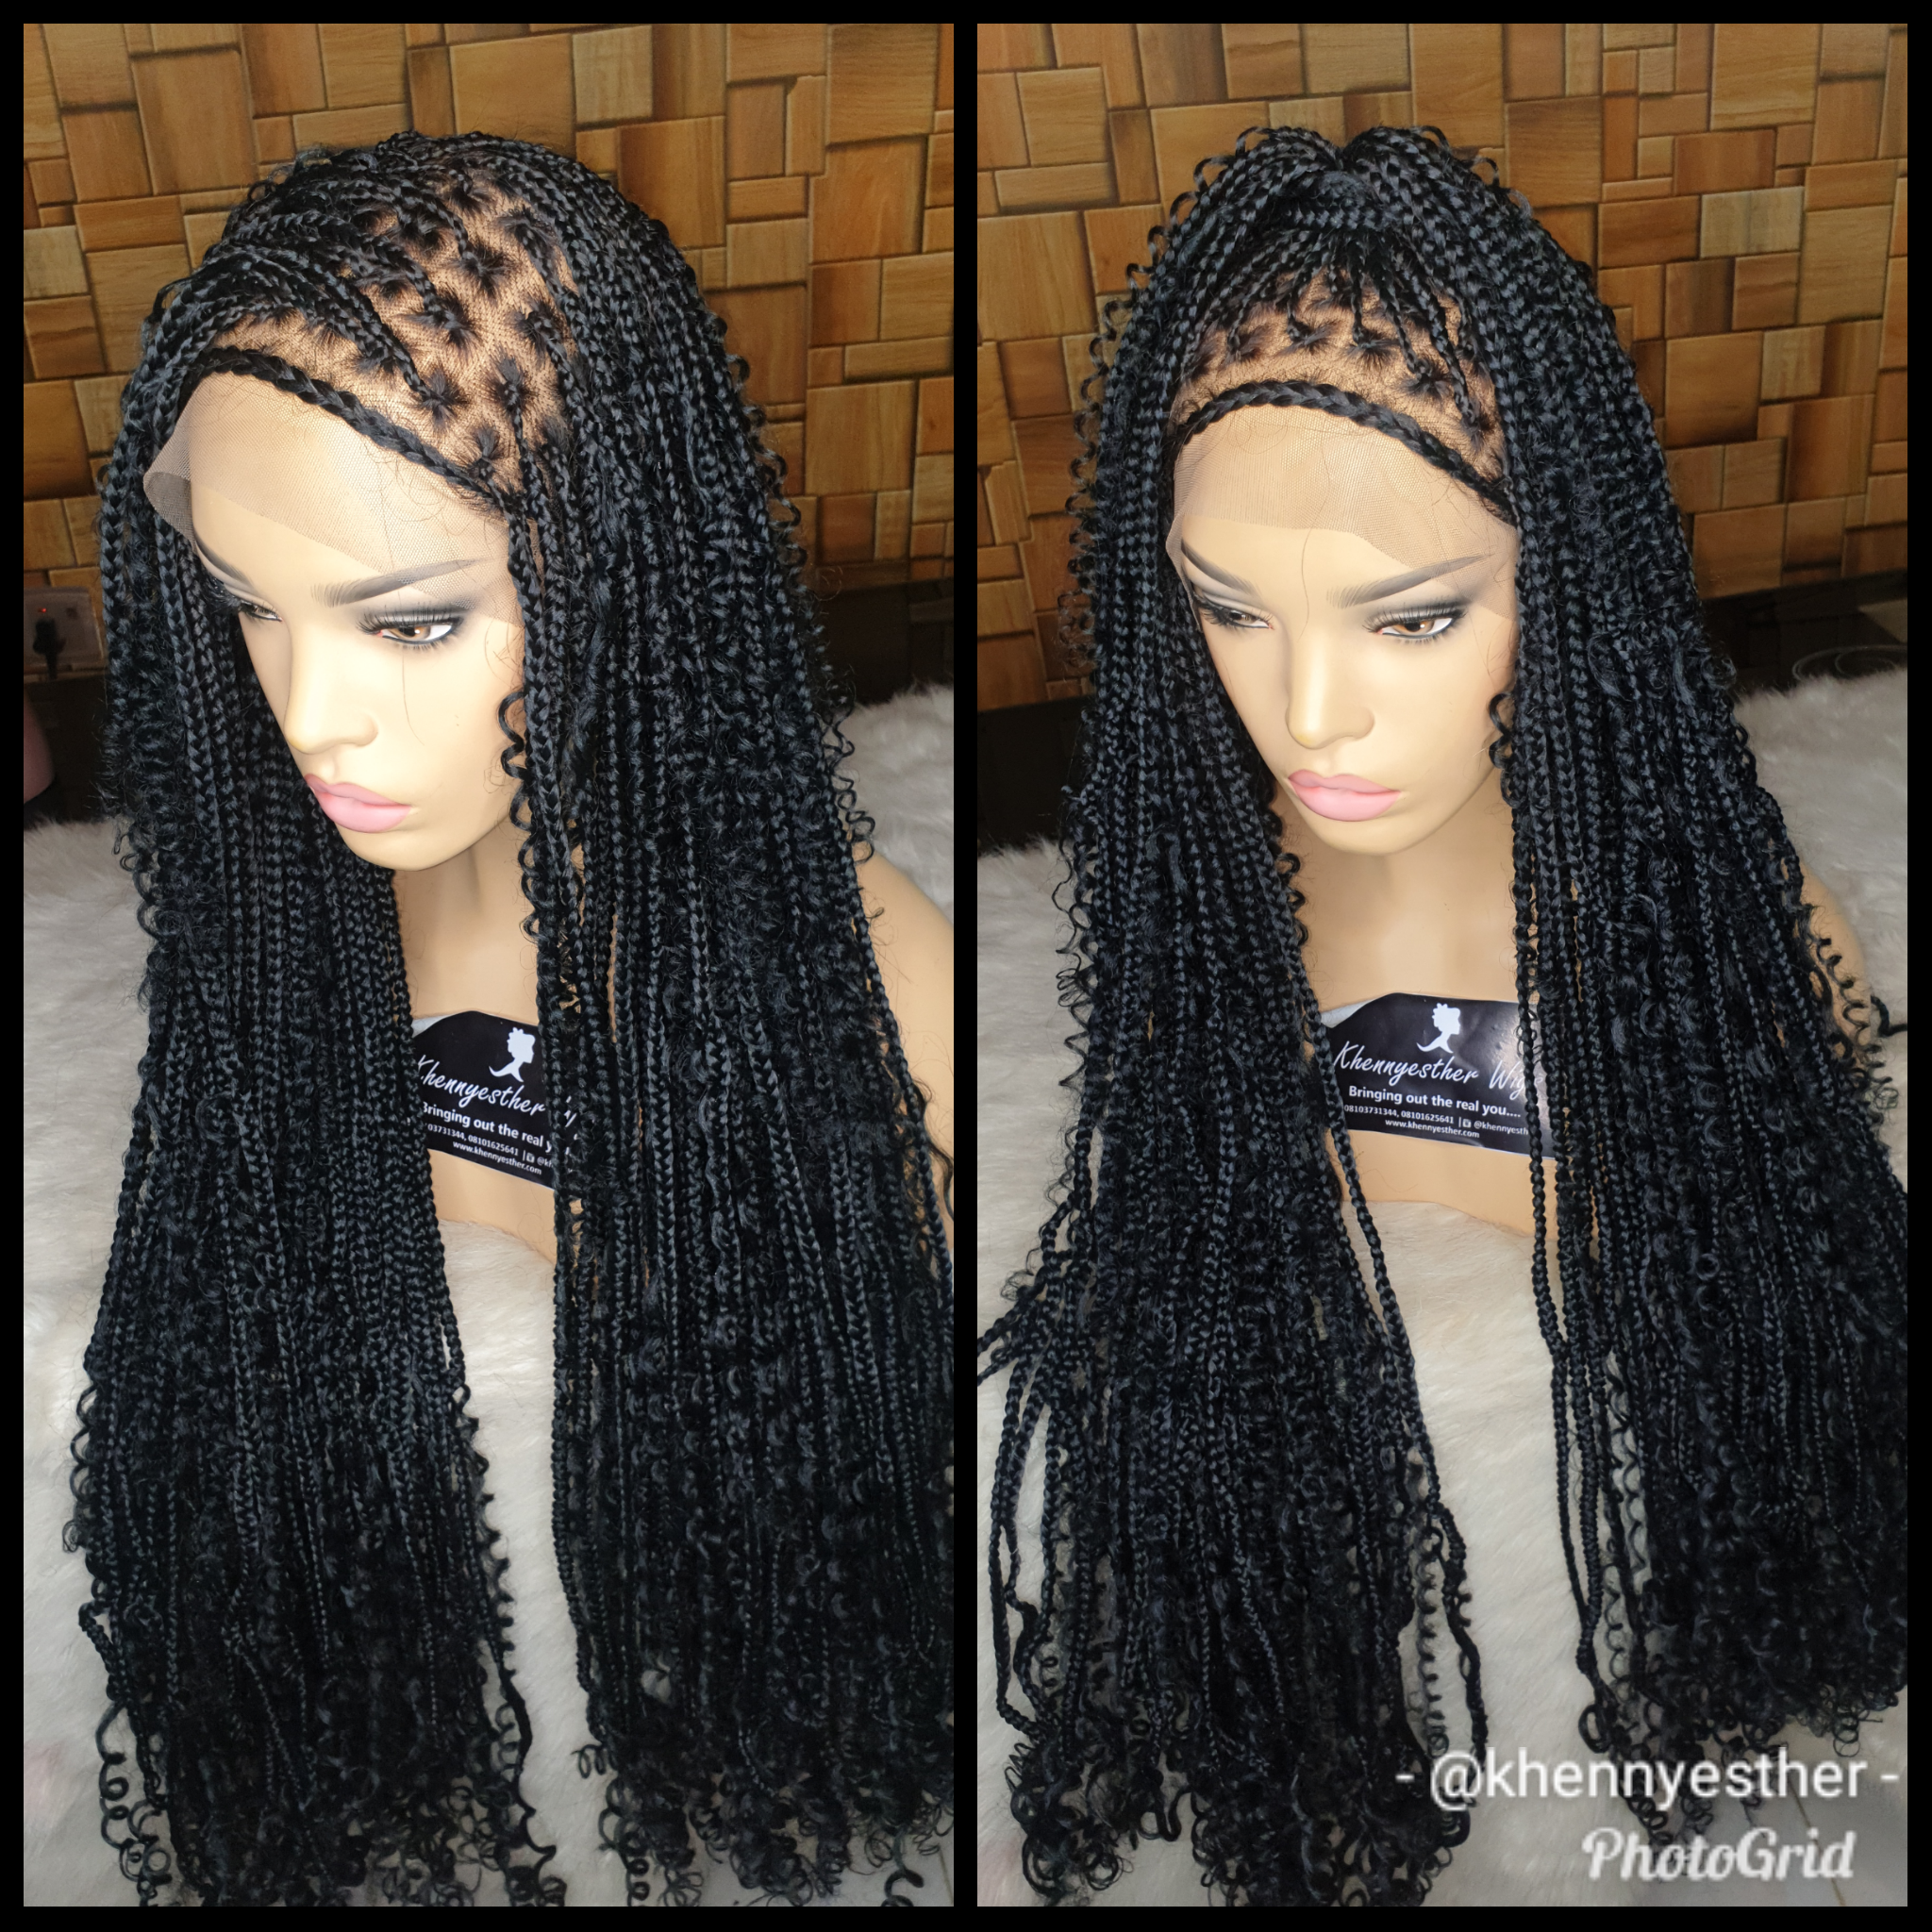 Human Hair Knotless Full Lace Braided Wig, Braided Wigs for Black